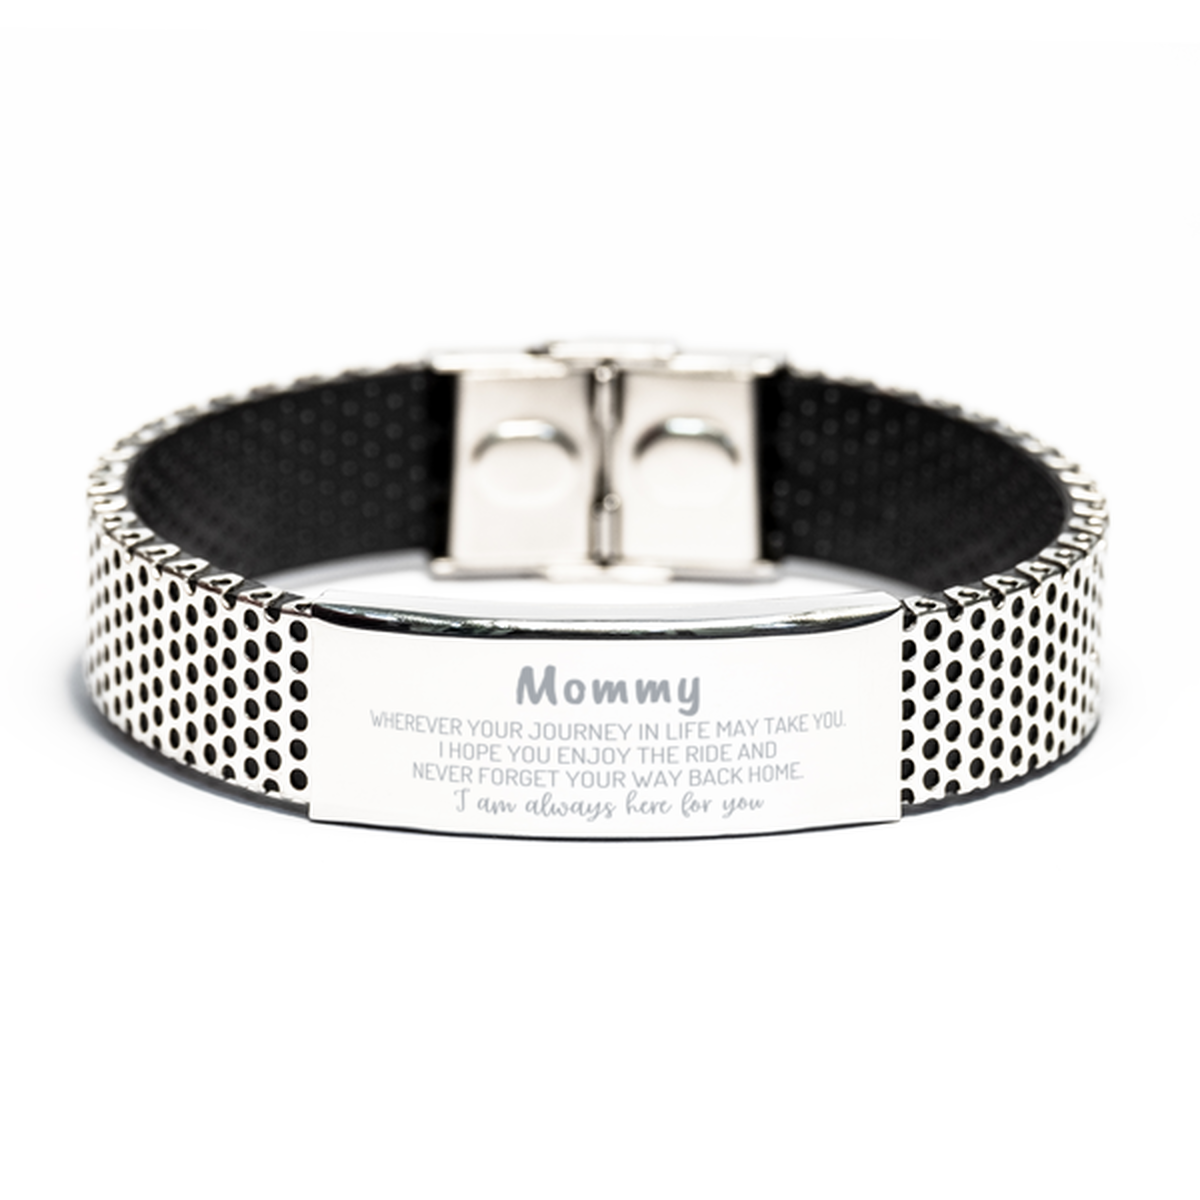 Mommy wherever your journey in life may take you, I am always here for you Mommy Stainless Steel Bracelet, Awesome Christmas Gifts For Mommy, Mommy Birthday Gifts for Men Women Family Loved One